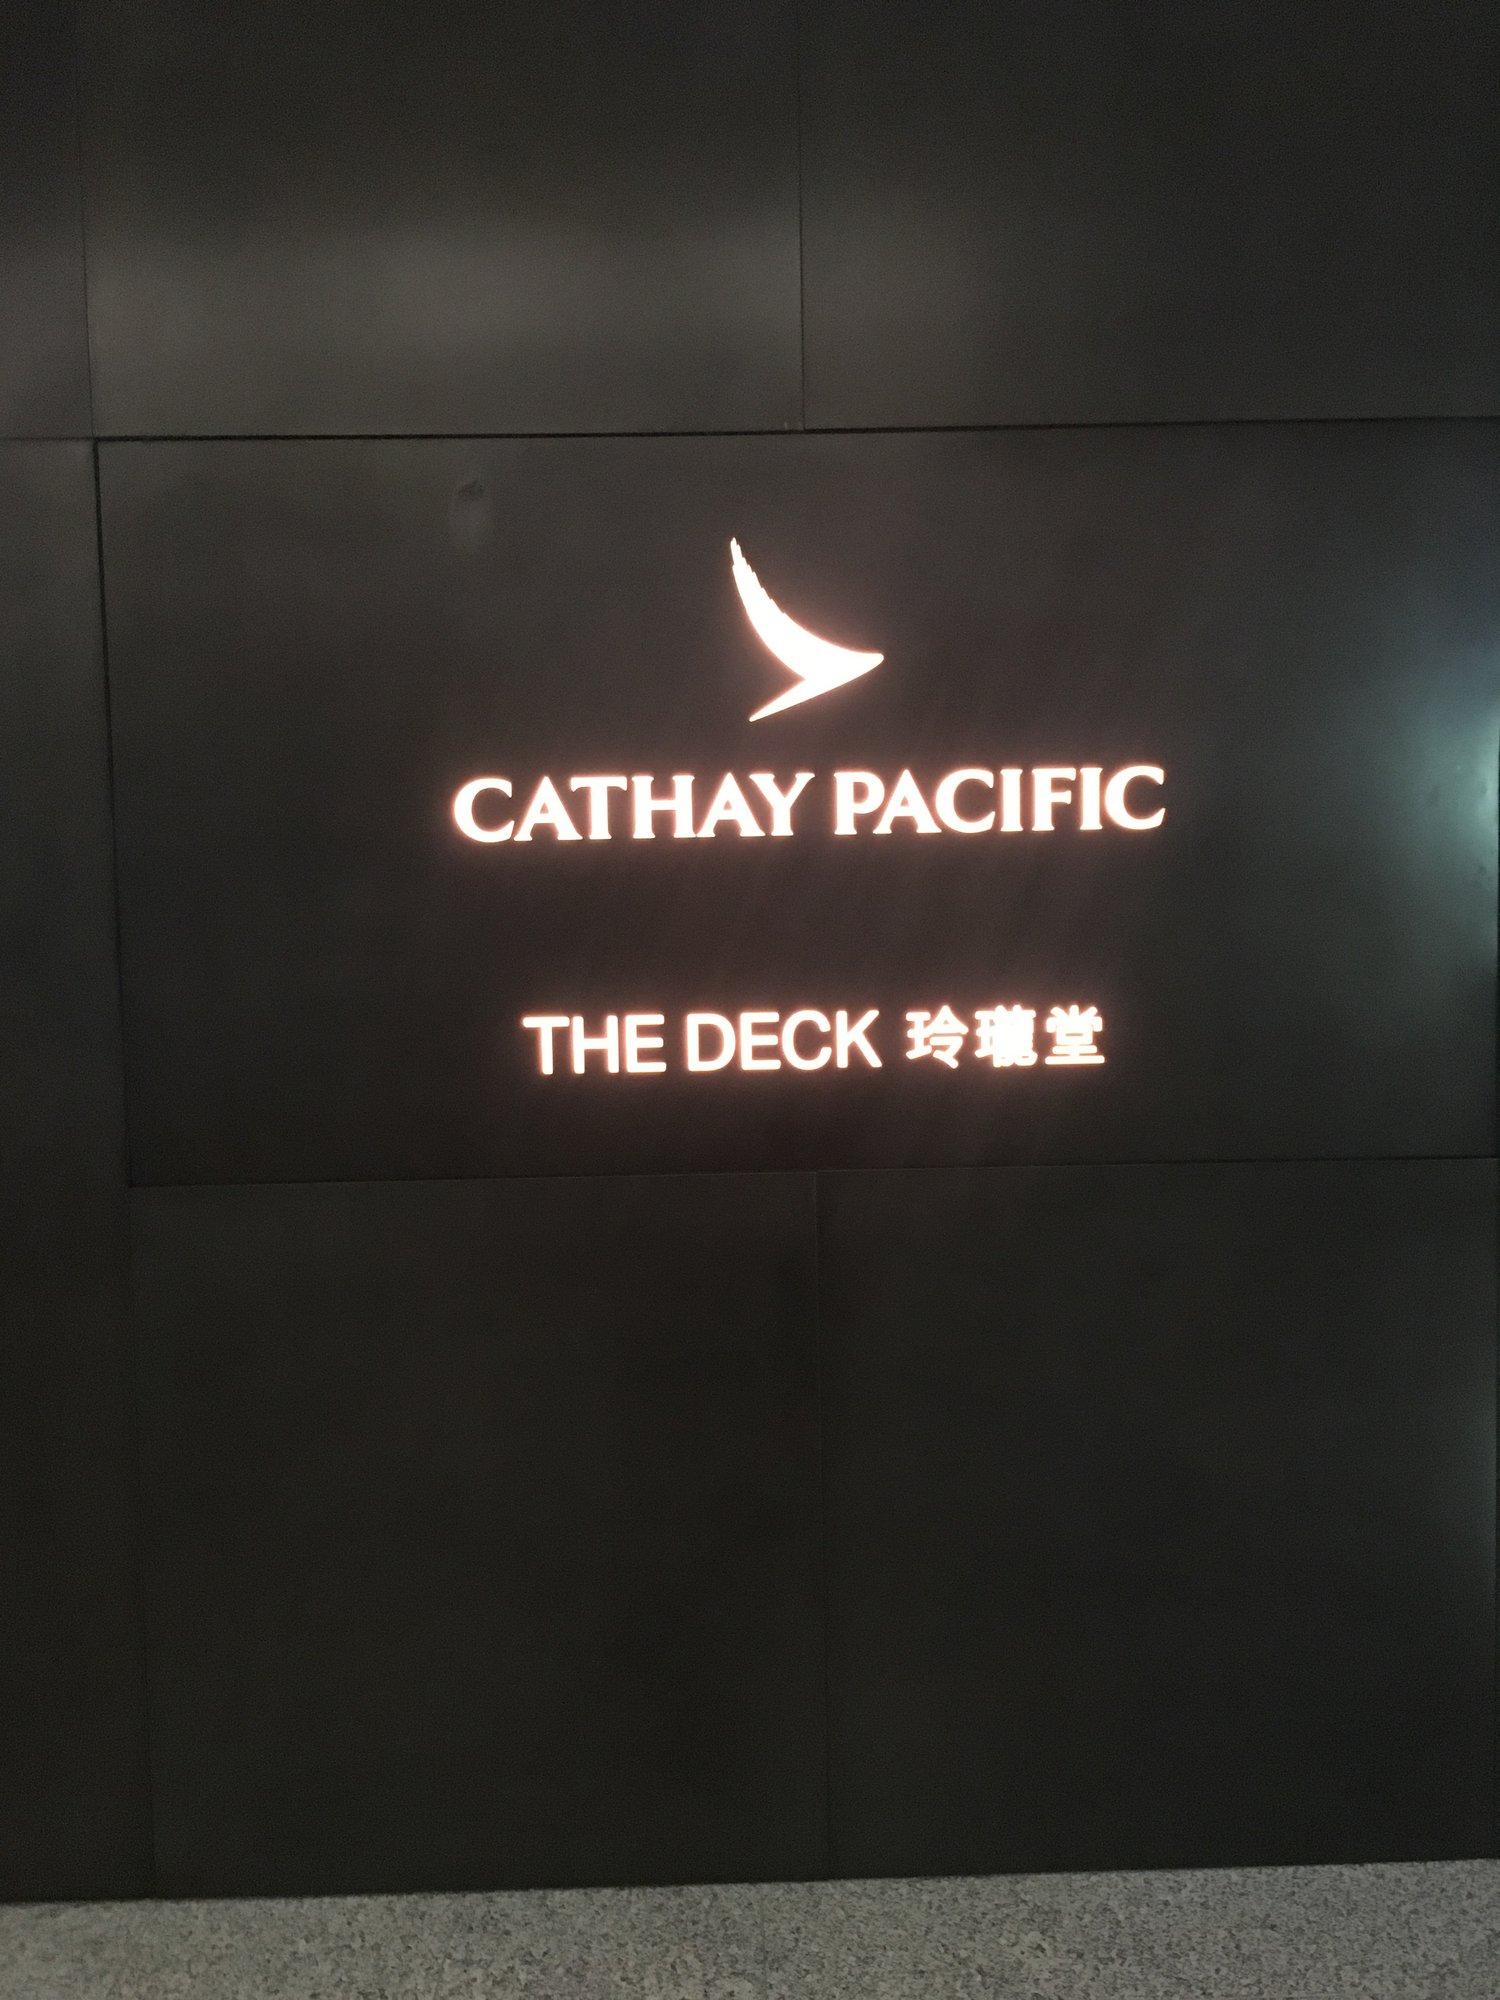 Cathay Pacific The Deck image 11 of 33